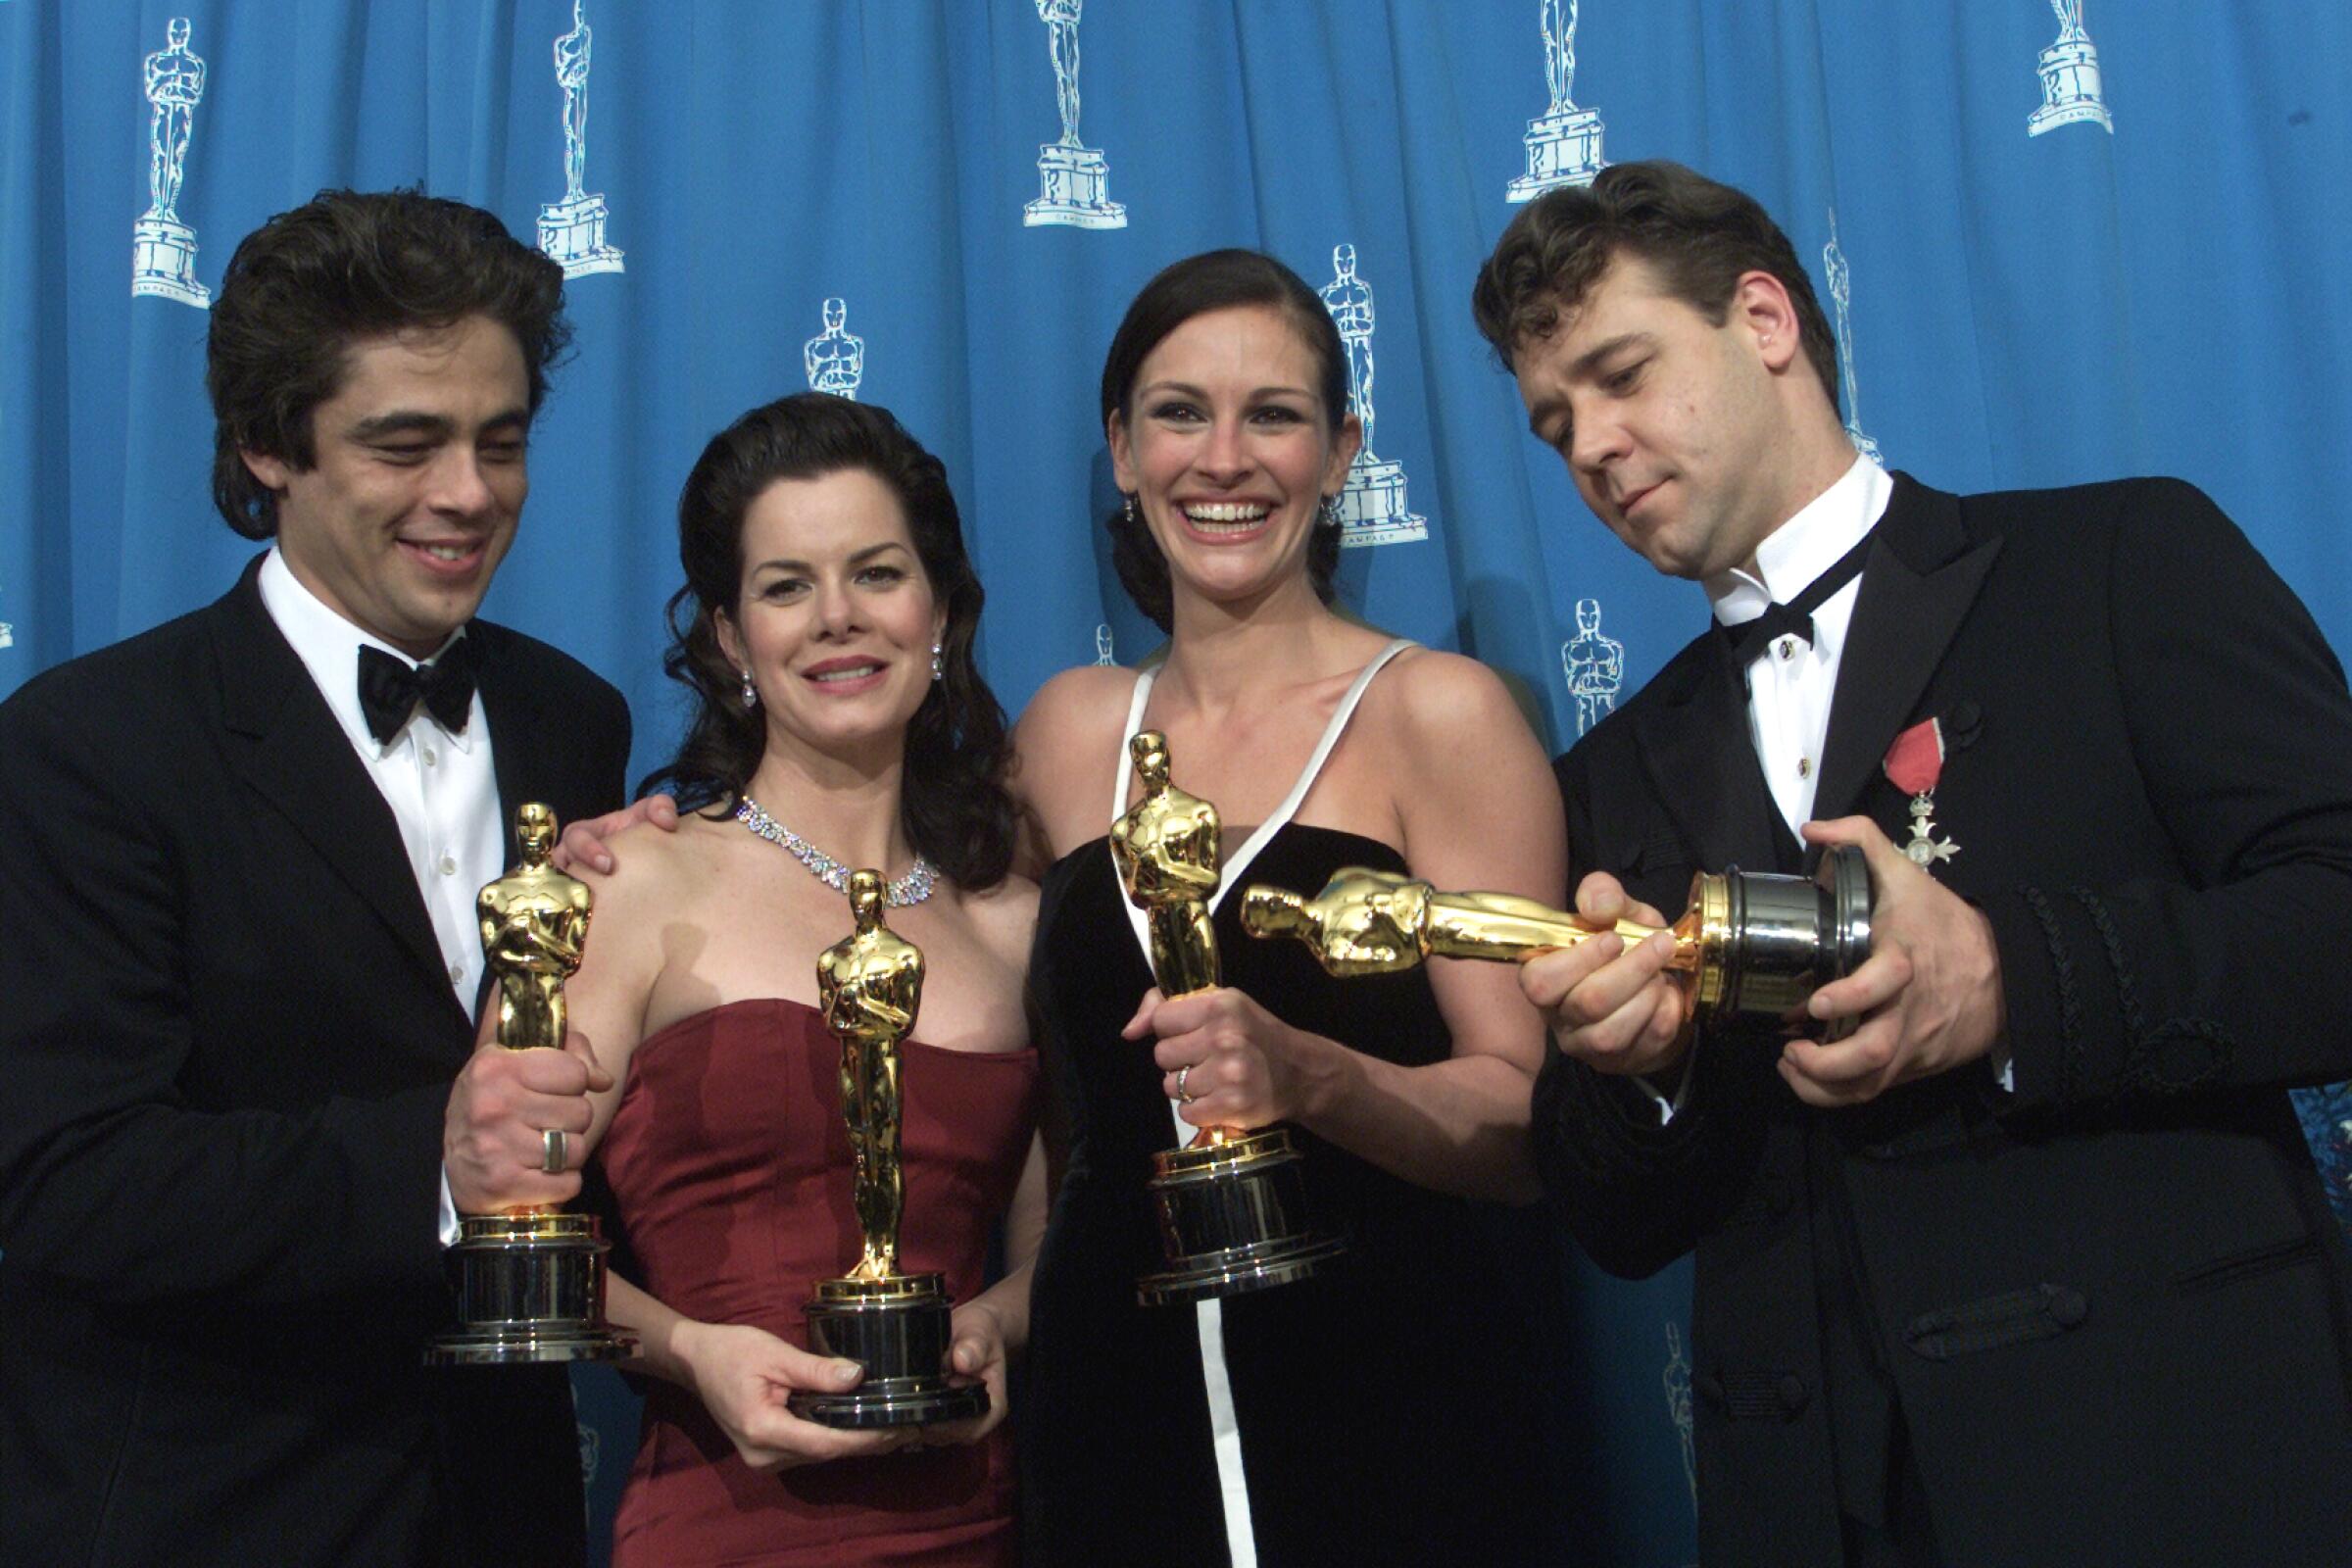 Benicio Del Toro, Marcia Gay Harden, Julia Roberts and Russel Crowe hold their Oscars at the 2001 Oscars.